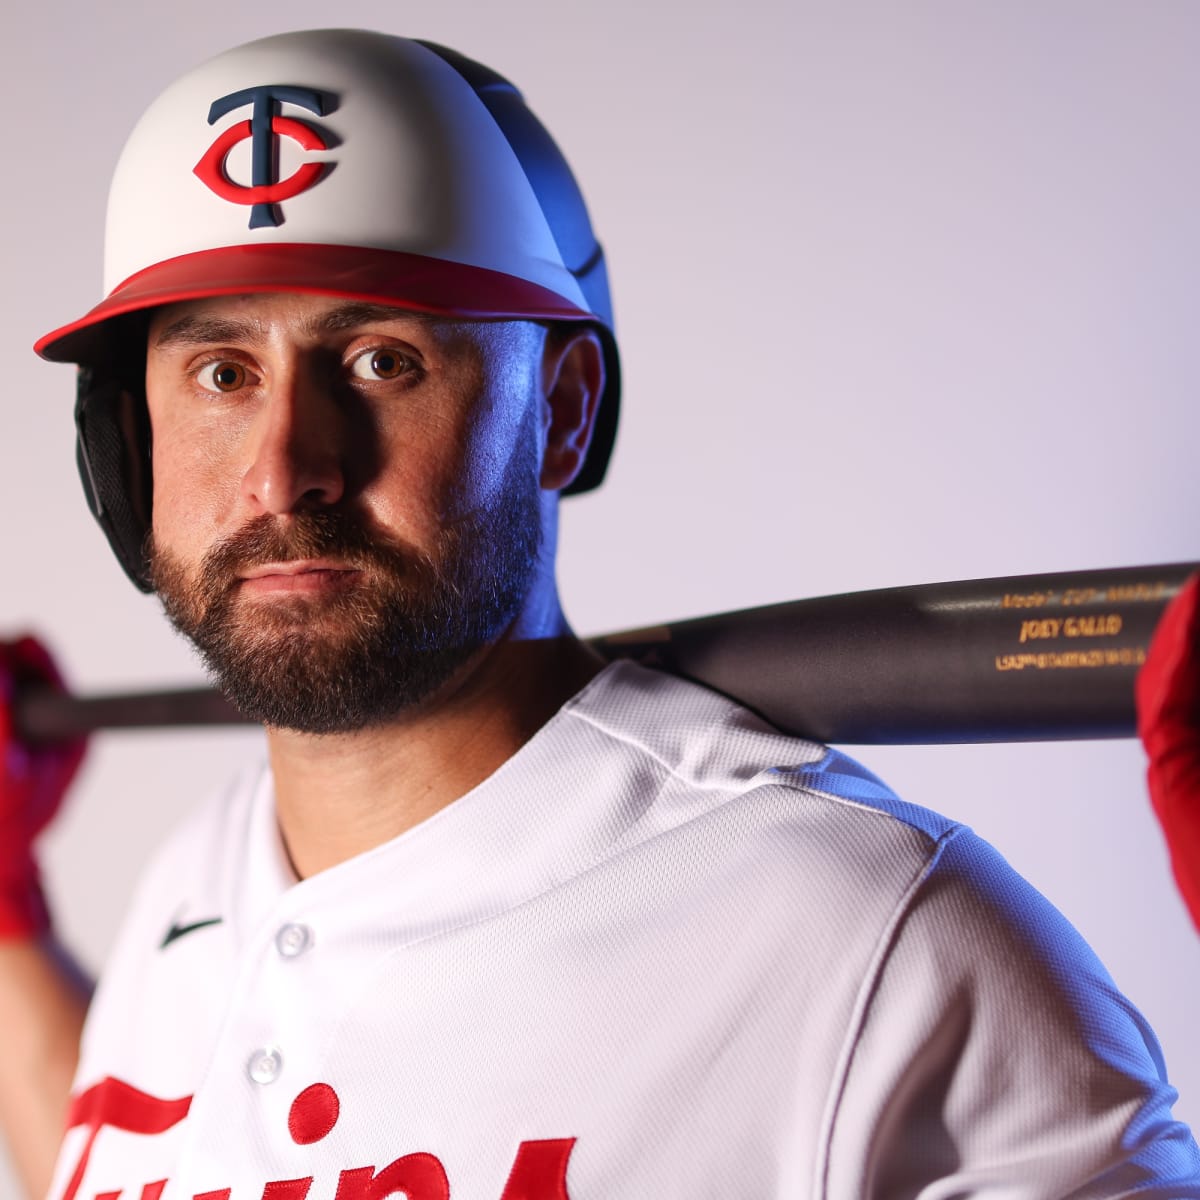 Will Joey Gallo finally return to his old form with the Twins? : r